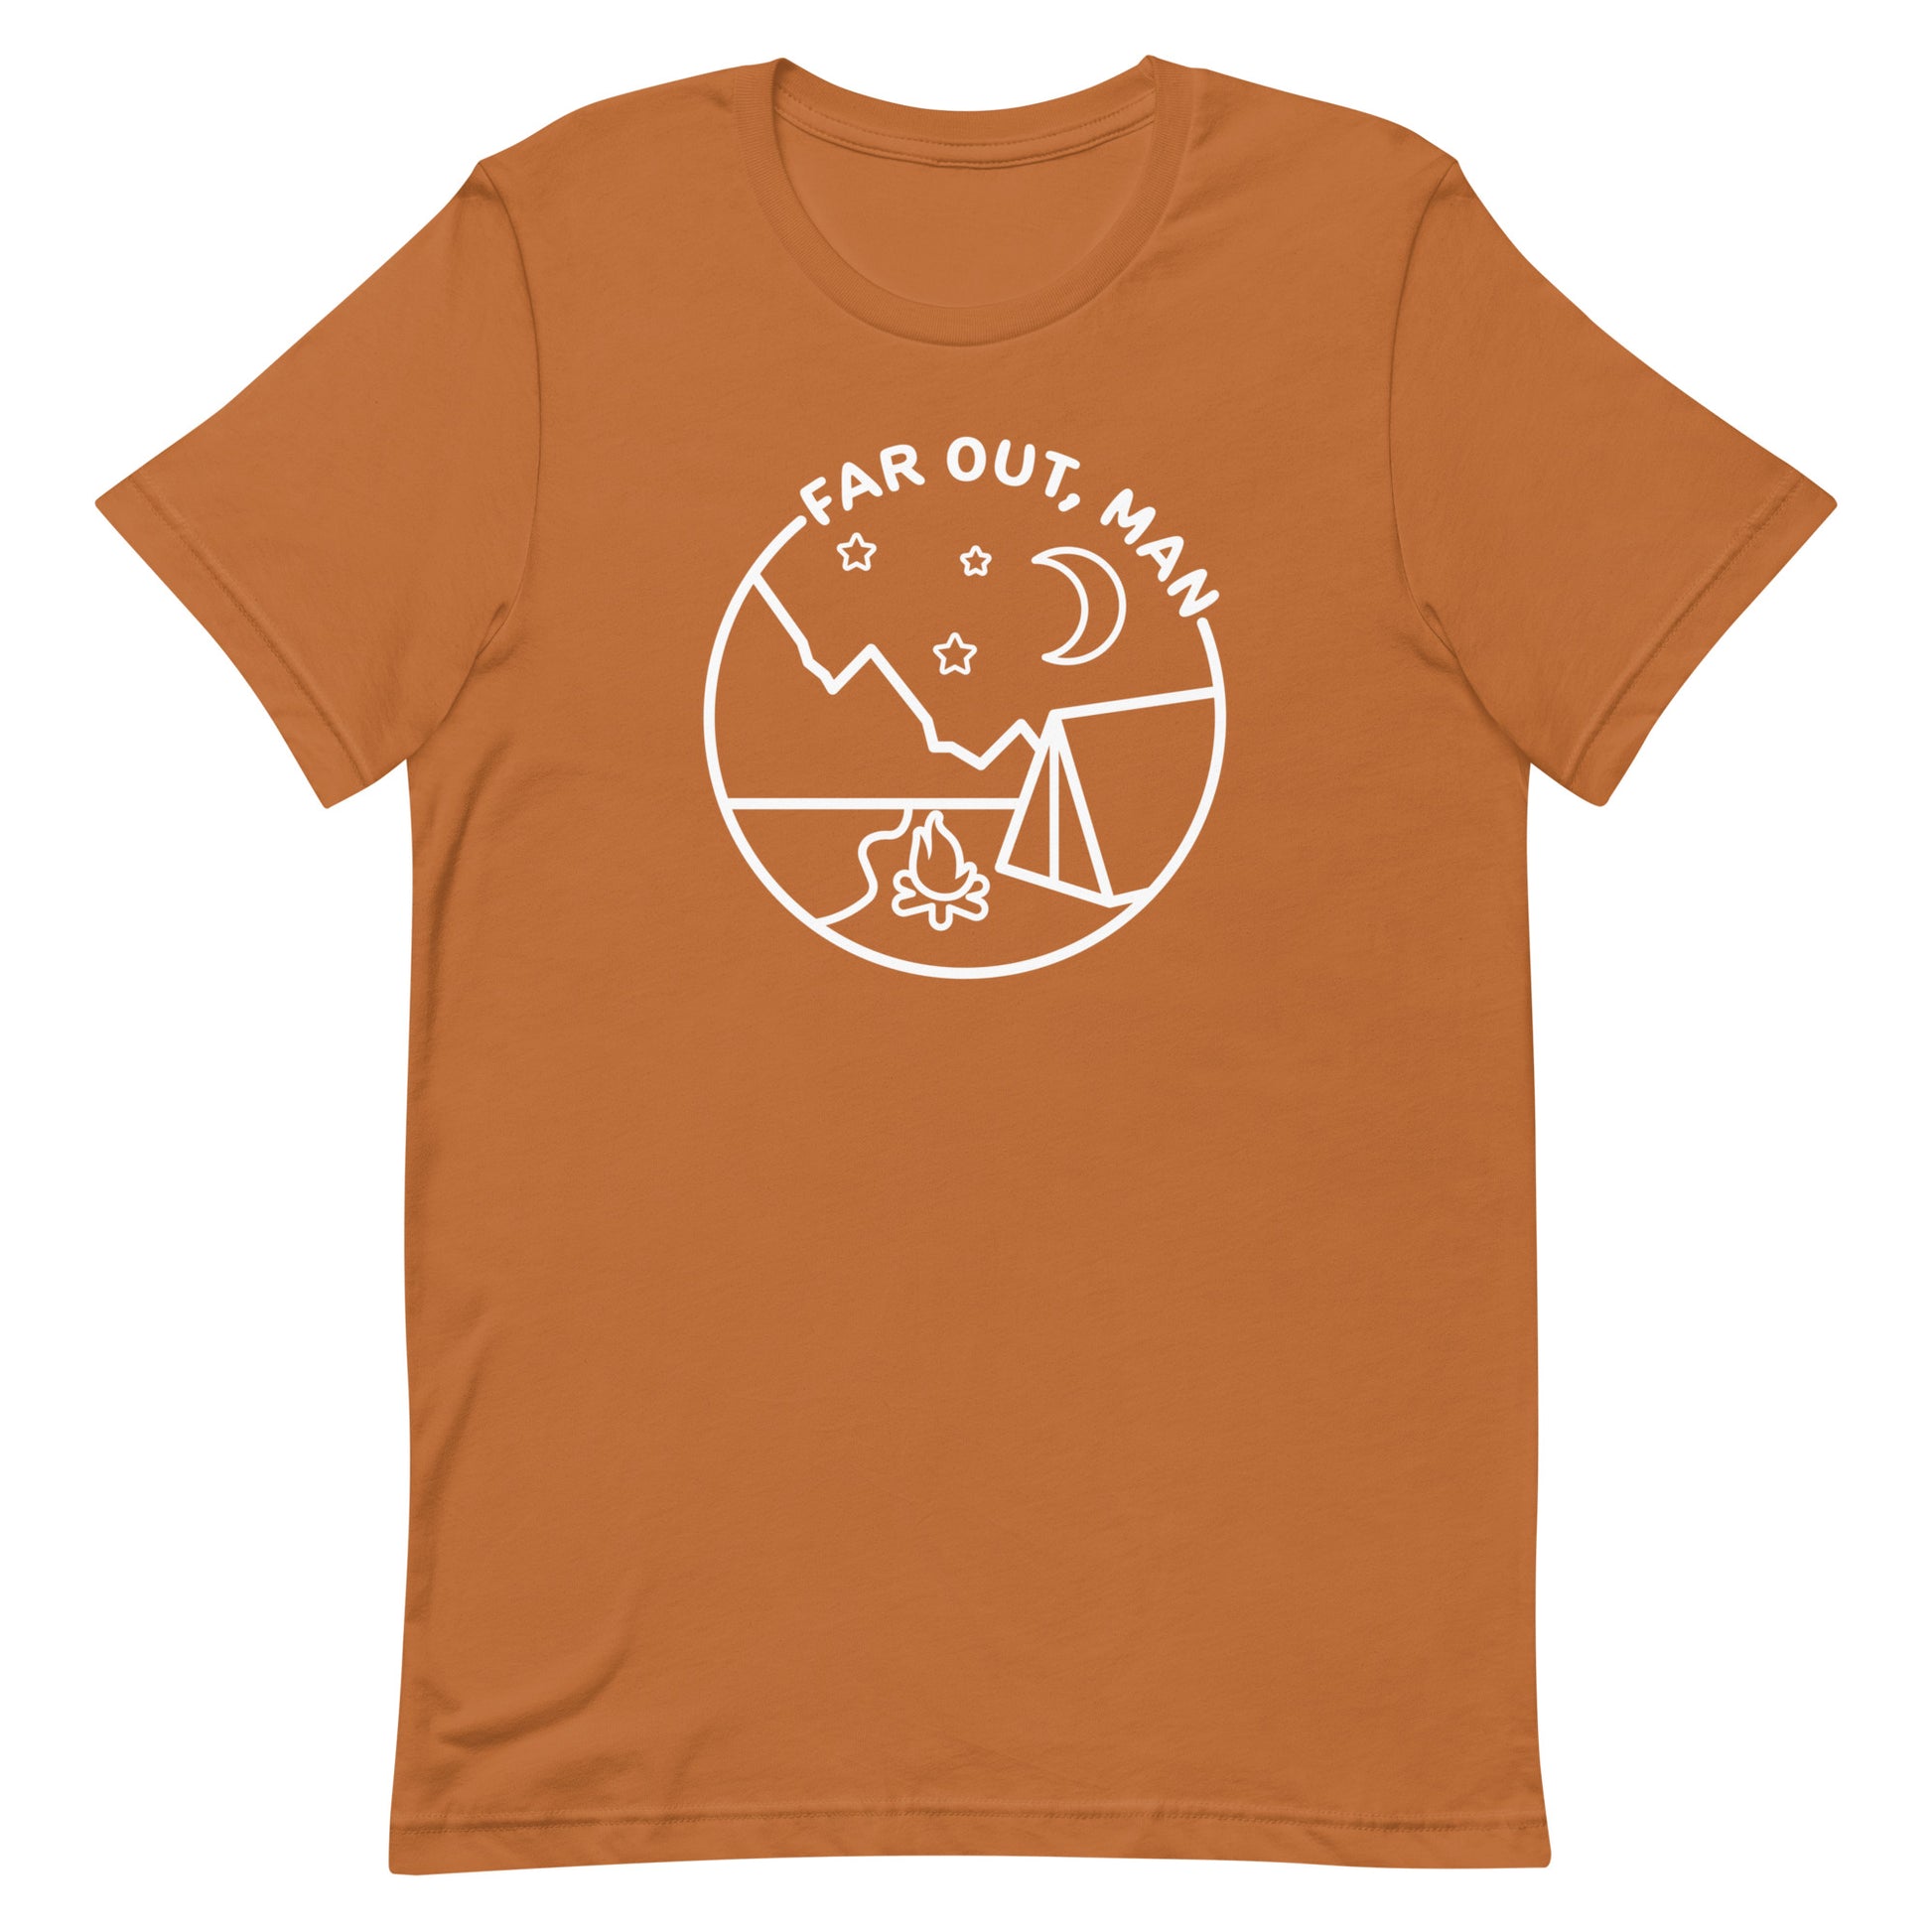 A burnt orange t-shirt with a white lineart graphic of a tent and campfire under a night sky. Text in an arc above the image reads "Far out, man".